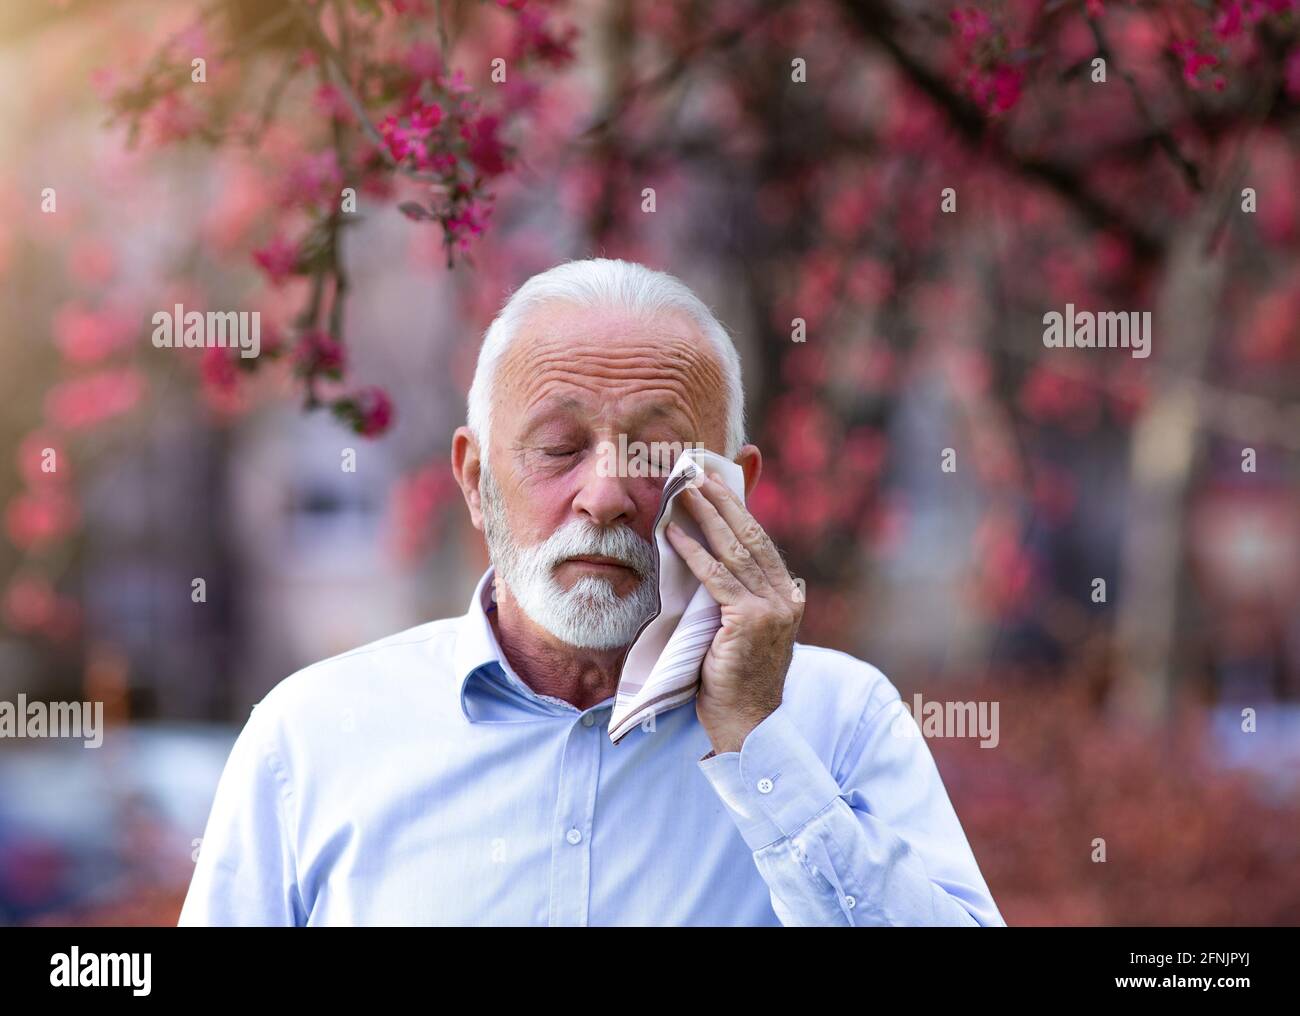 Senior man wiping eyes with tissue beside blooming tree in spring time. Itchy eyes from allergy Stock Photo